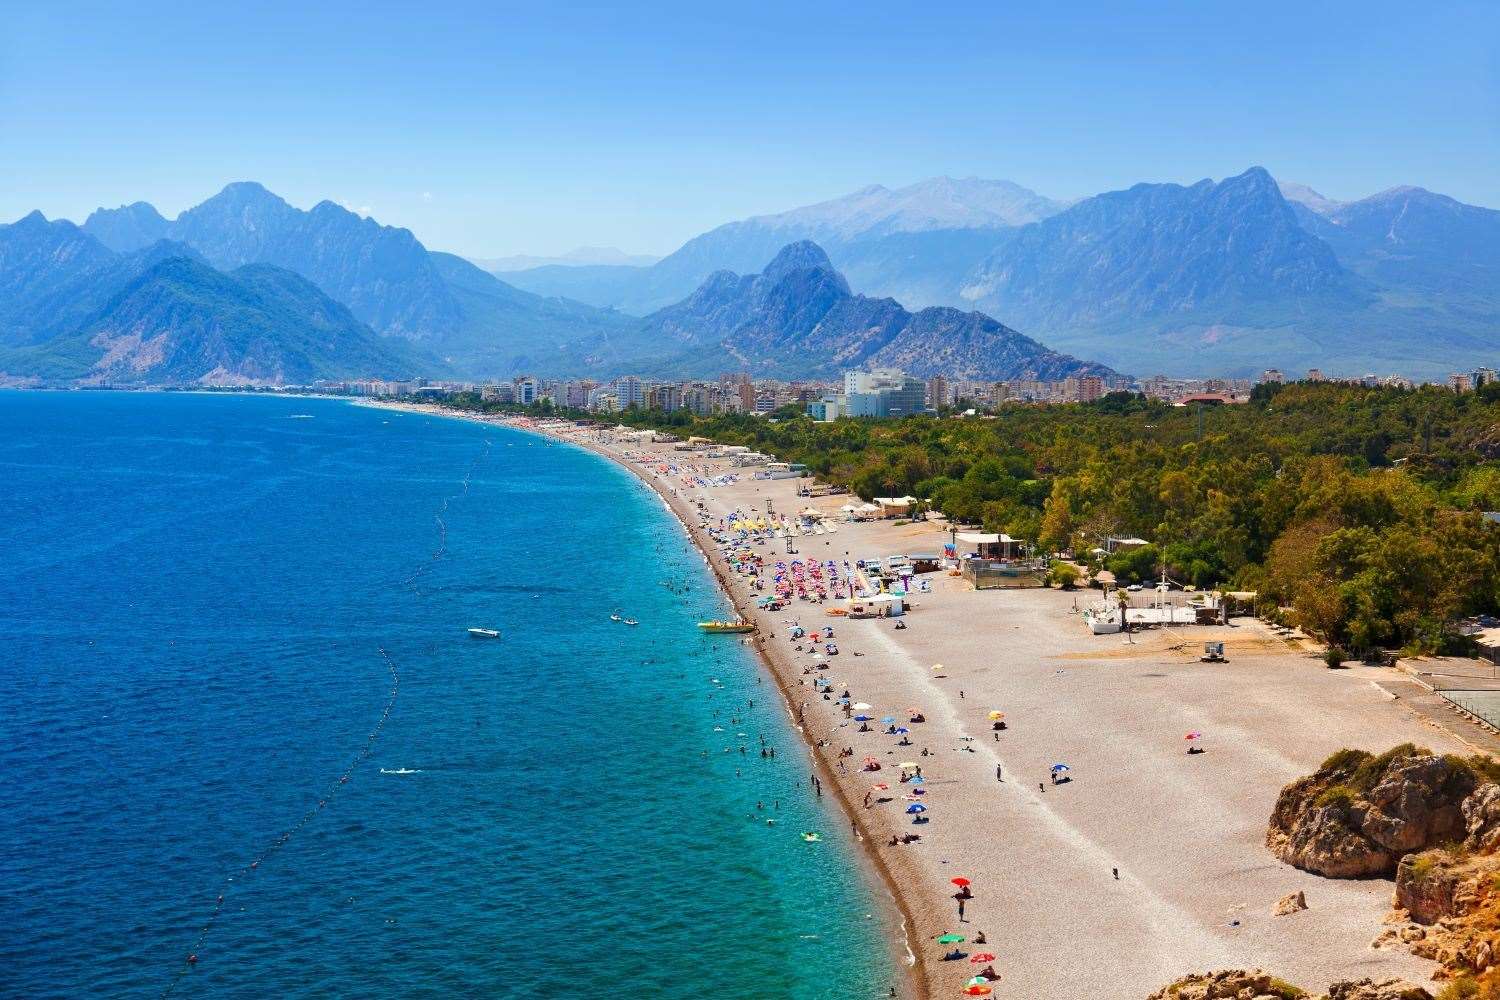 Antalya in Turkey is the most-booked summer holiday